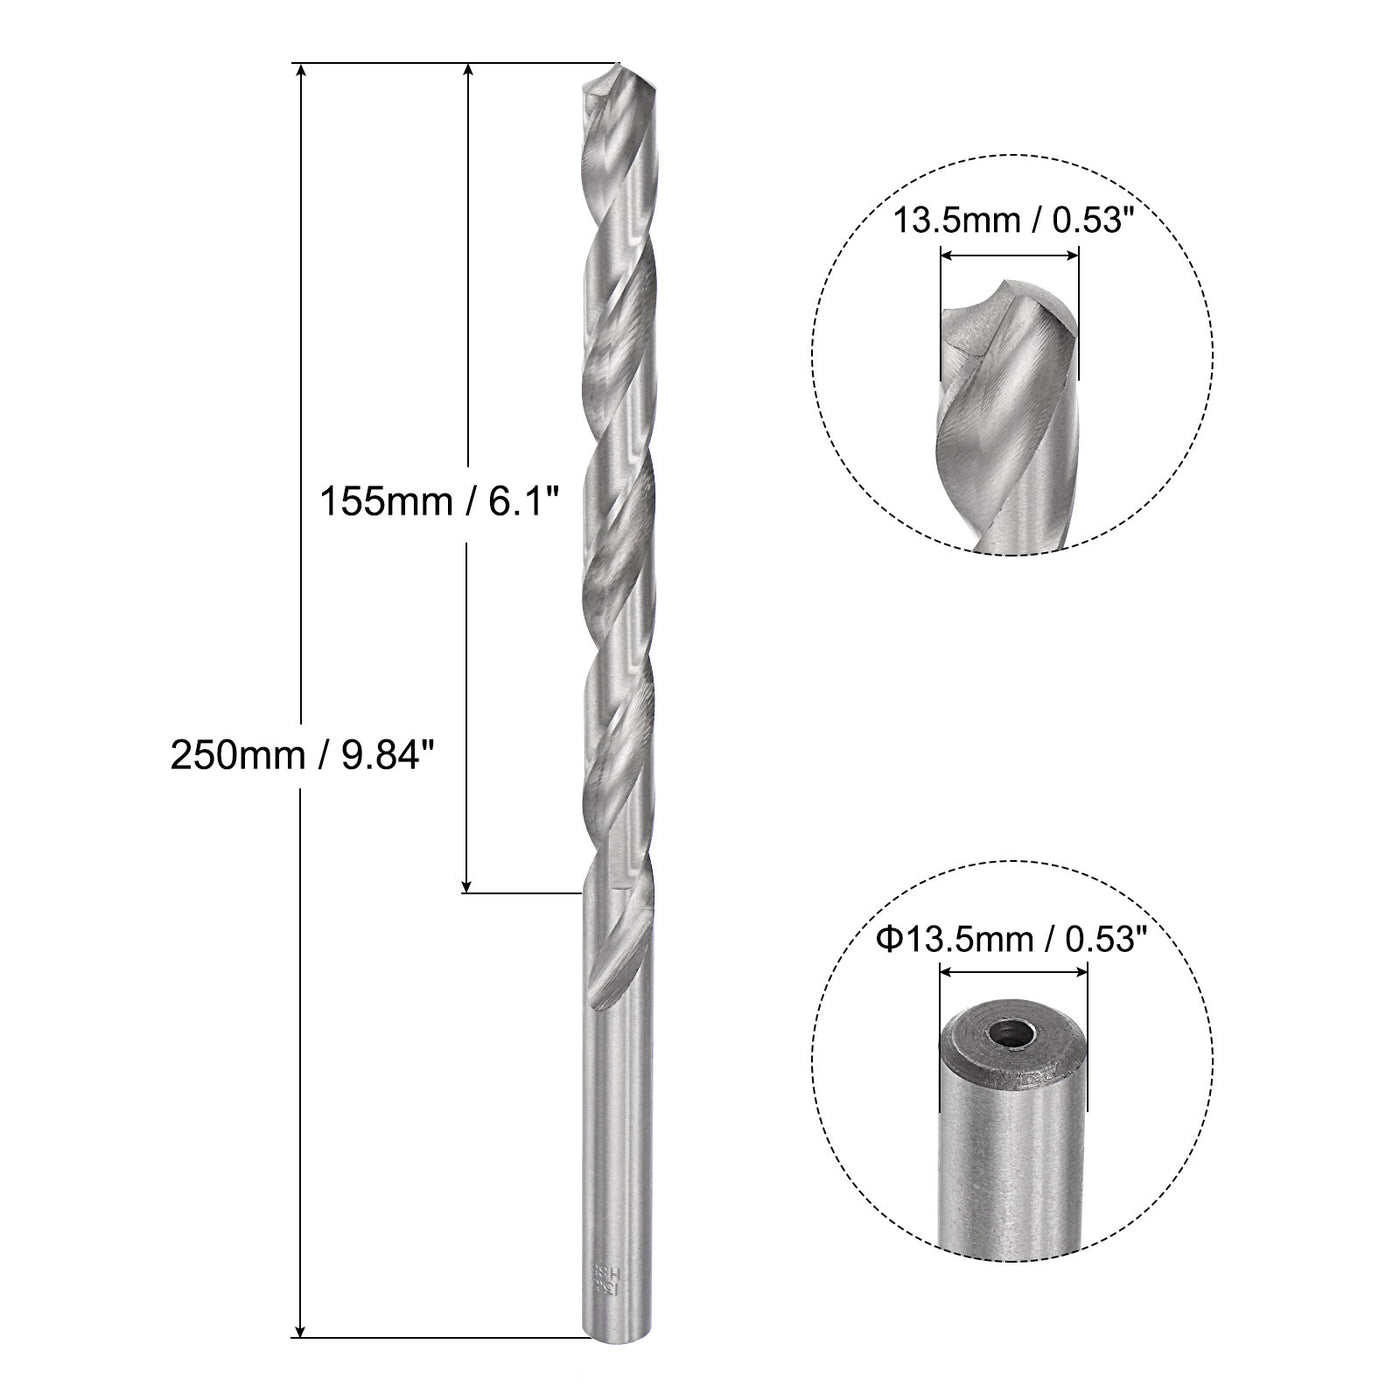 uxcell Uxcell 13.5mm Twist Drill Bits, High-Speed Steel Extra Long Drill Bit 250mm Length